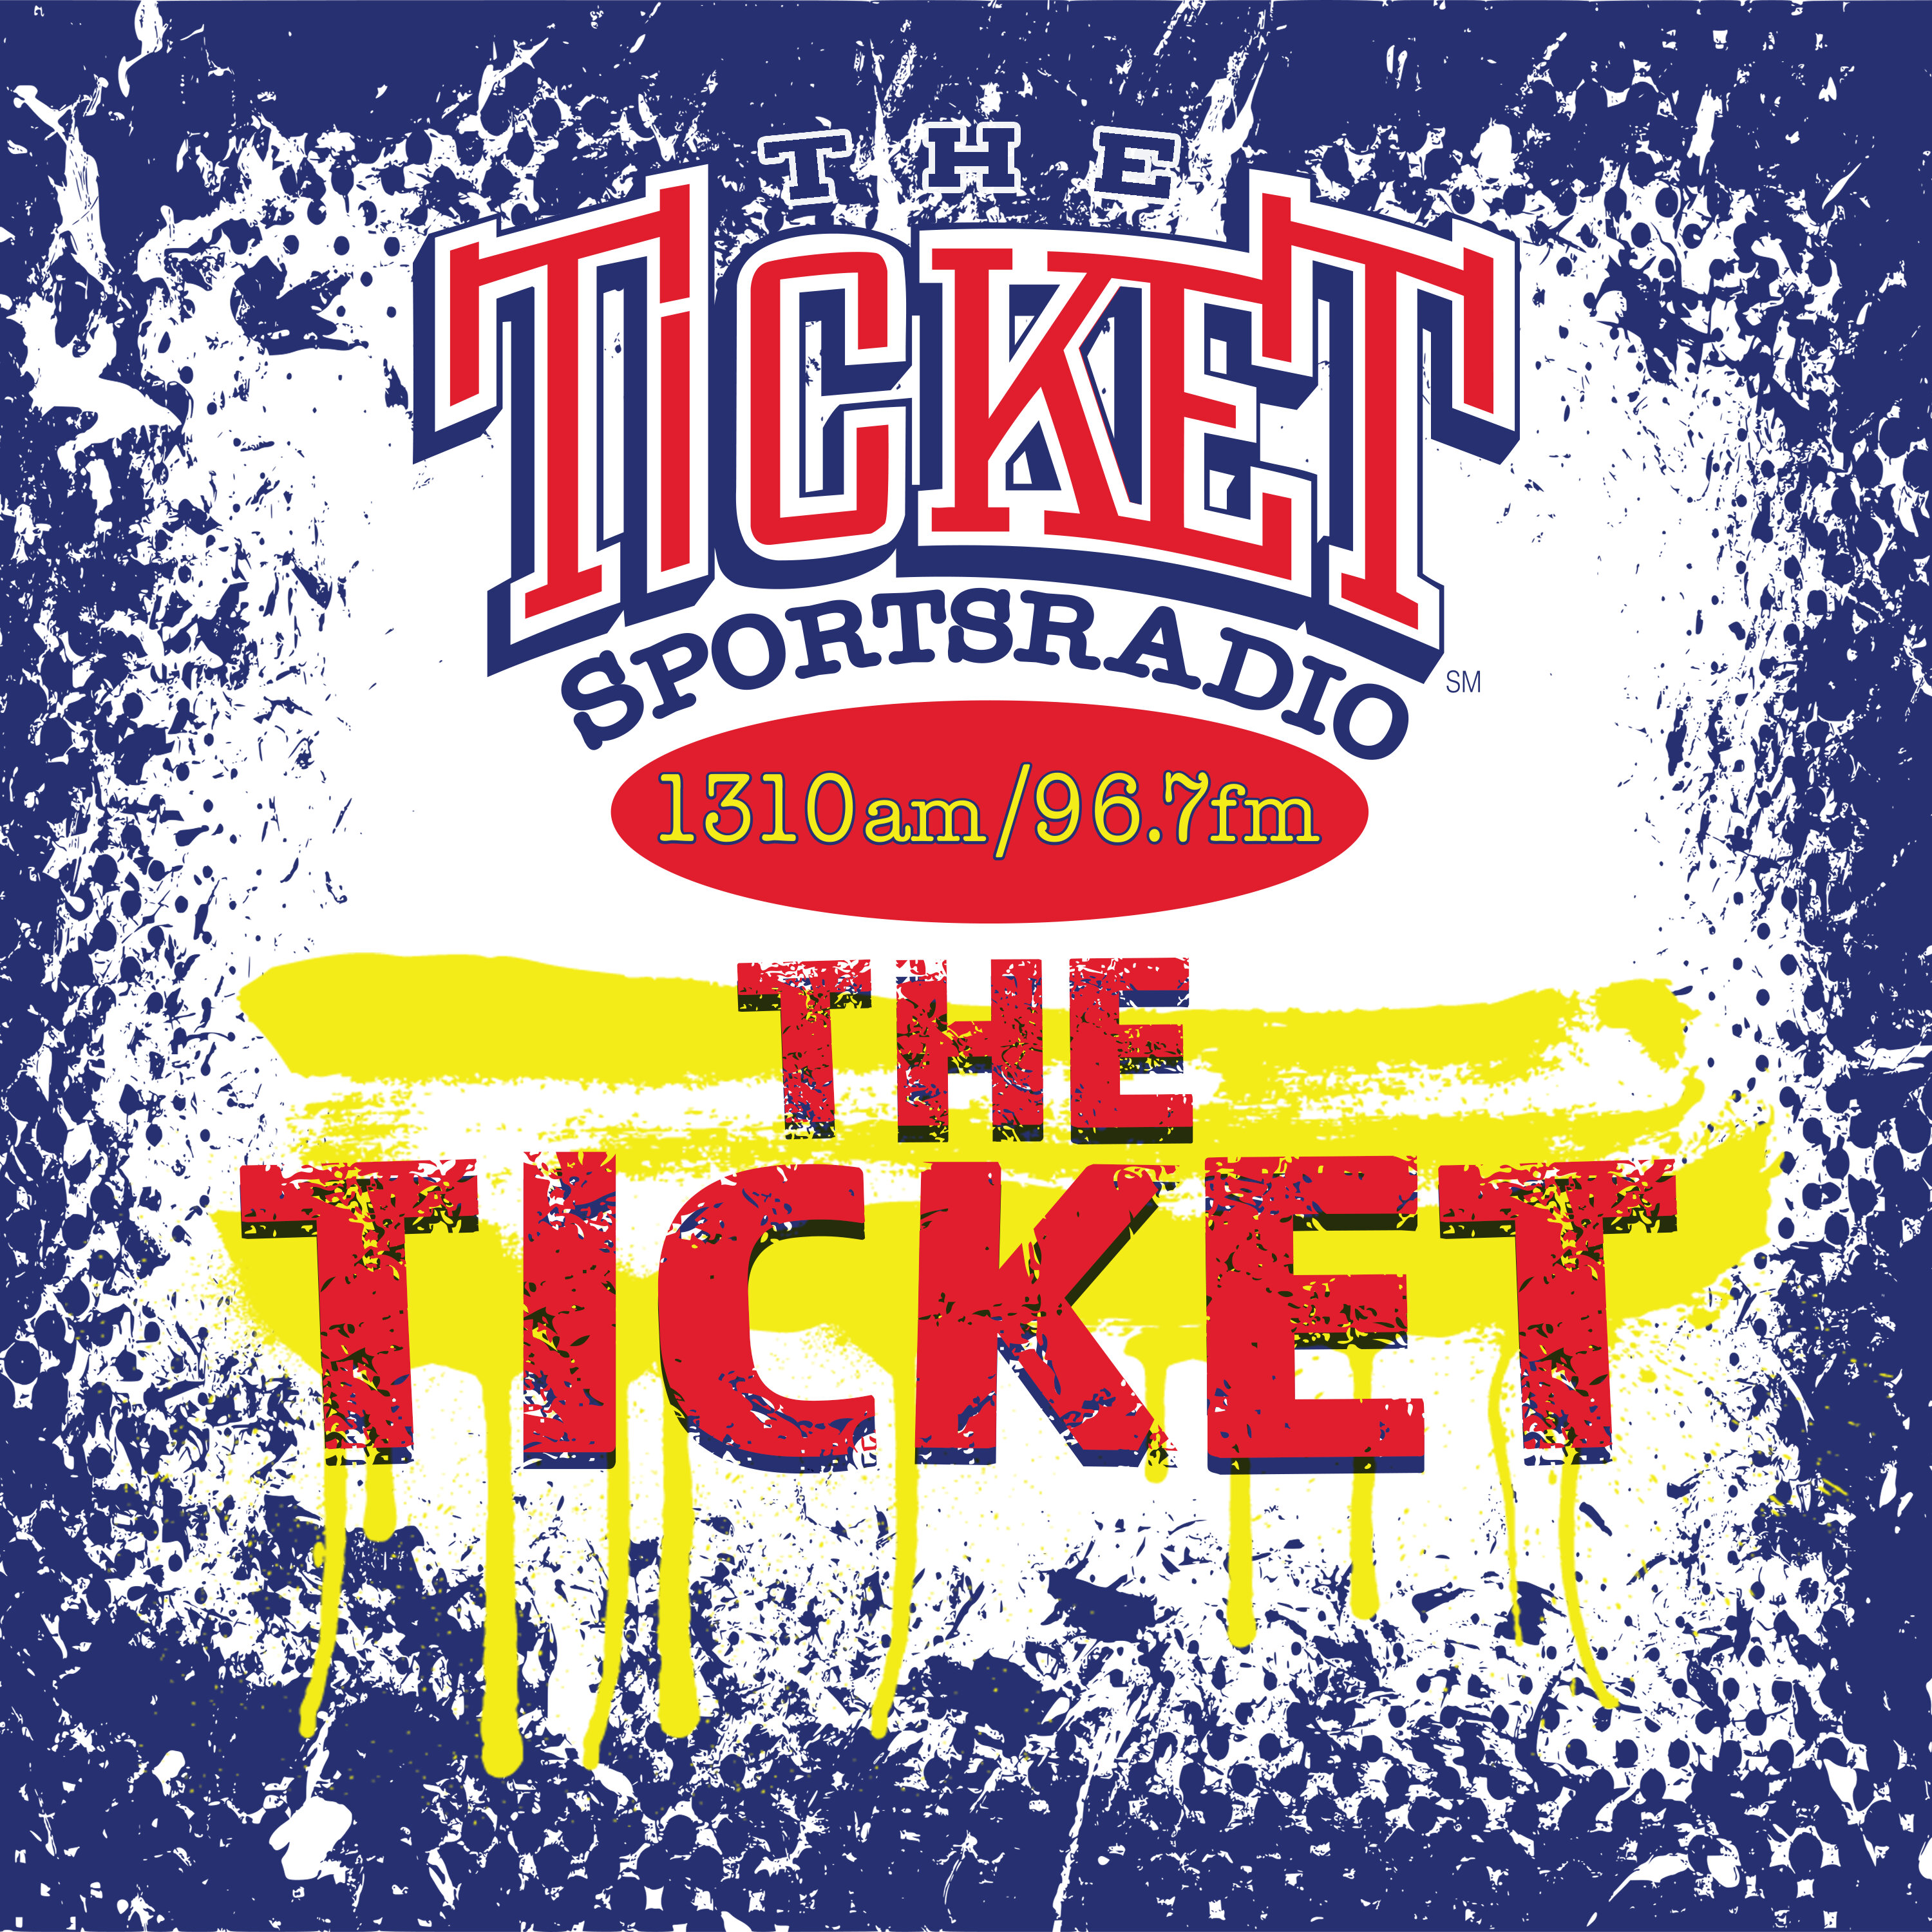 Sportsradio 1310 and 96.7 FM The Ticket